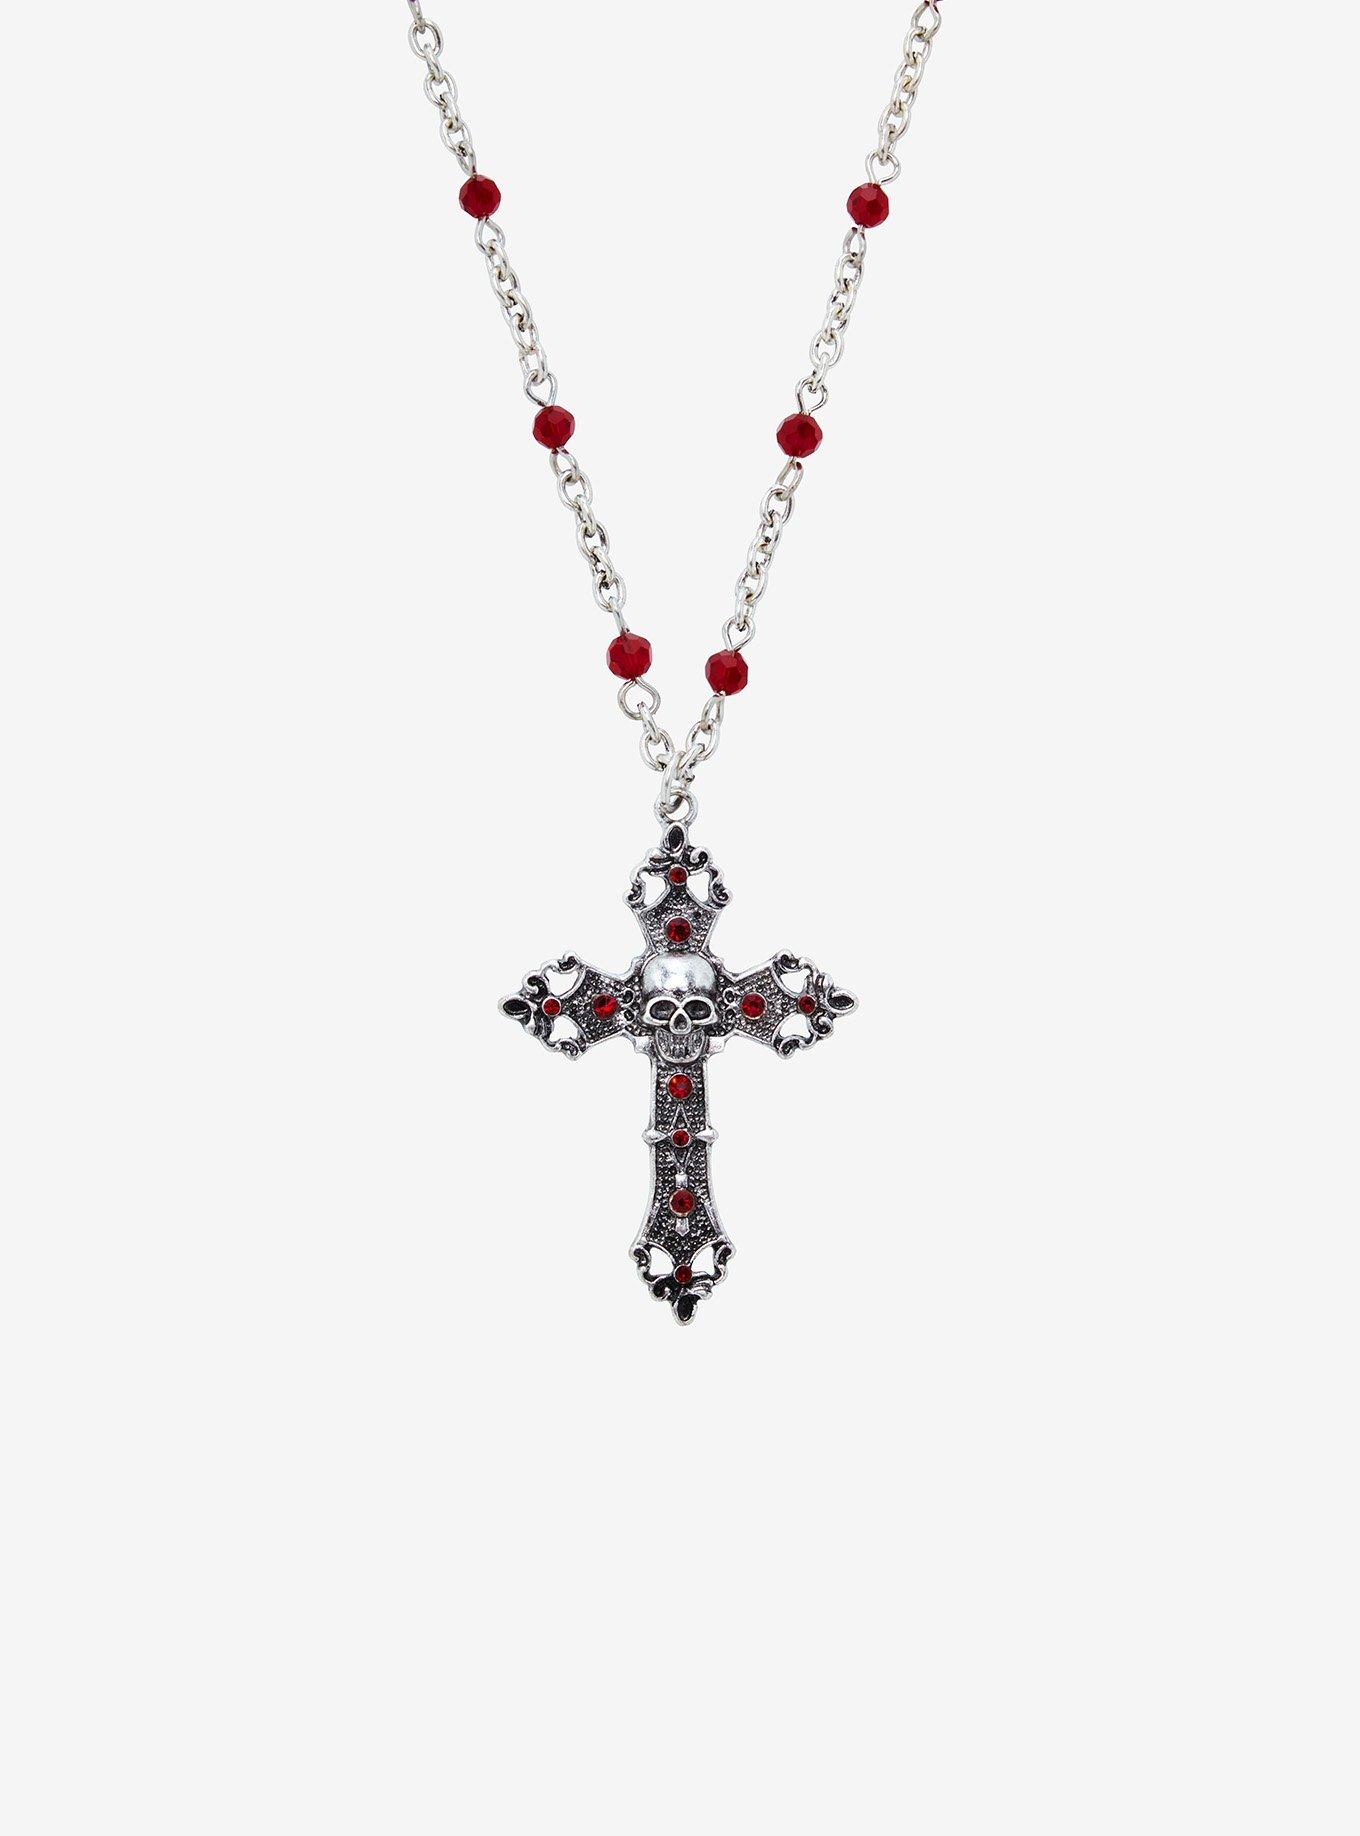 Social Collision Skull Gothic Red Cross Necklace